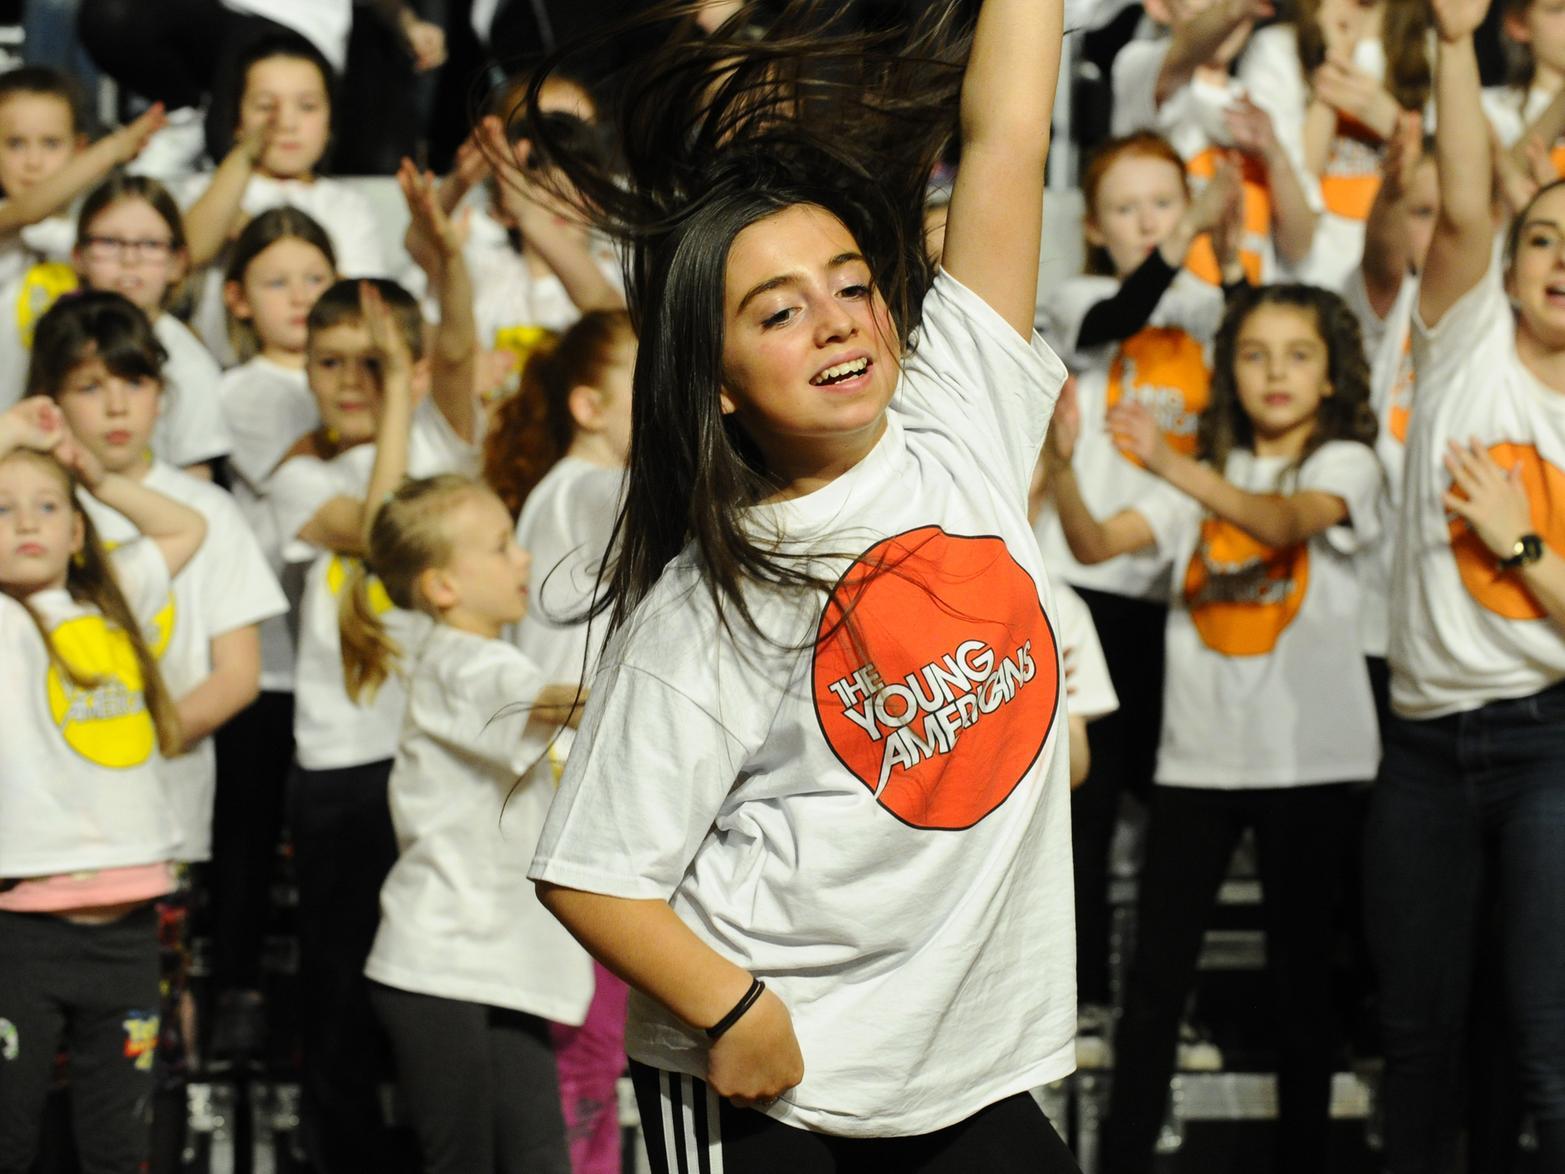 The Young Americans, music and dance workshop at Grangemouth Town Hall.